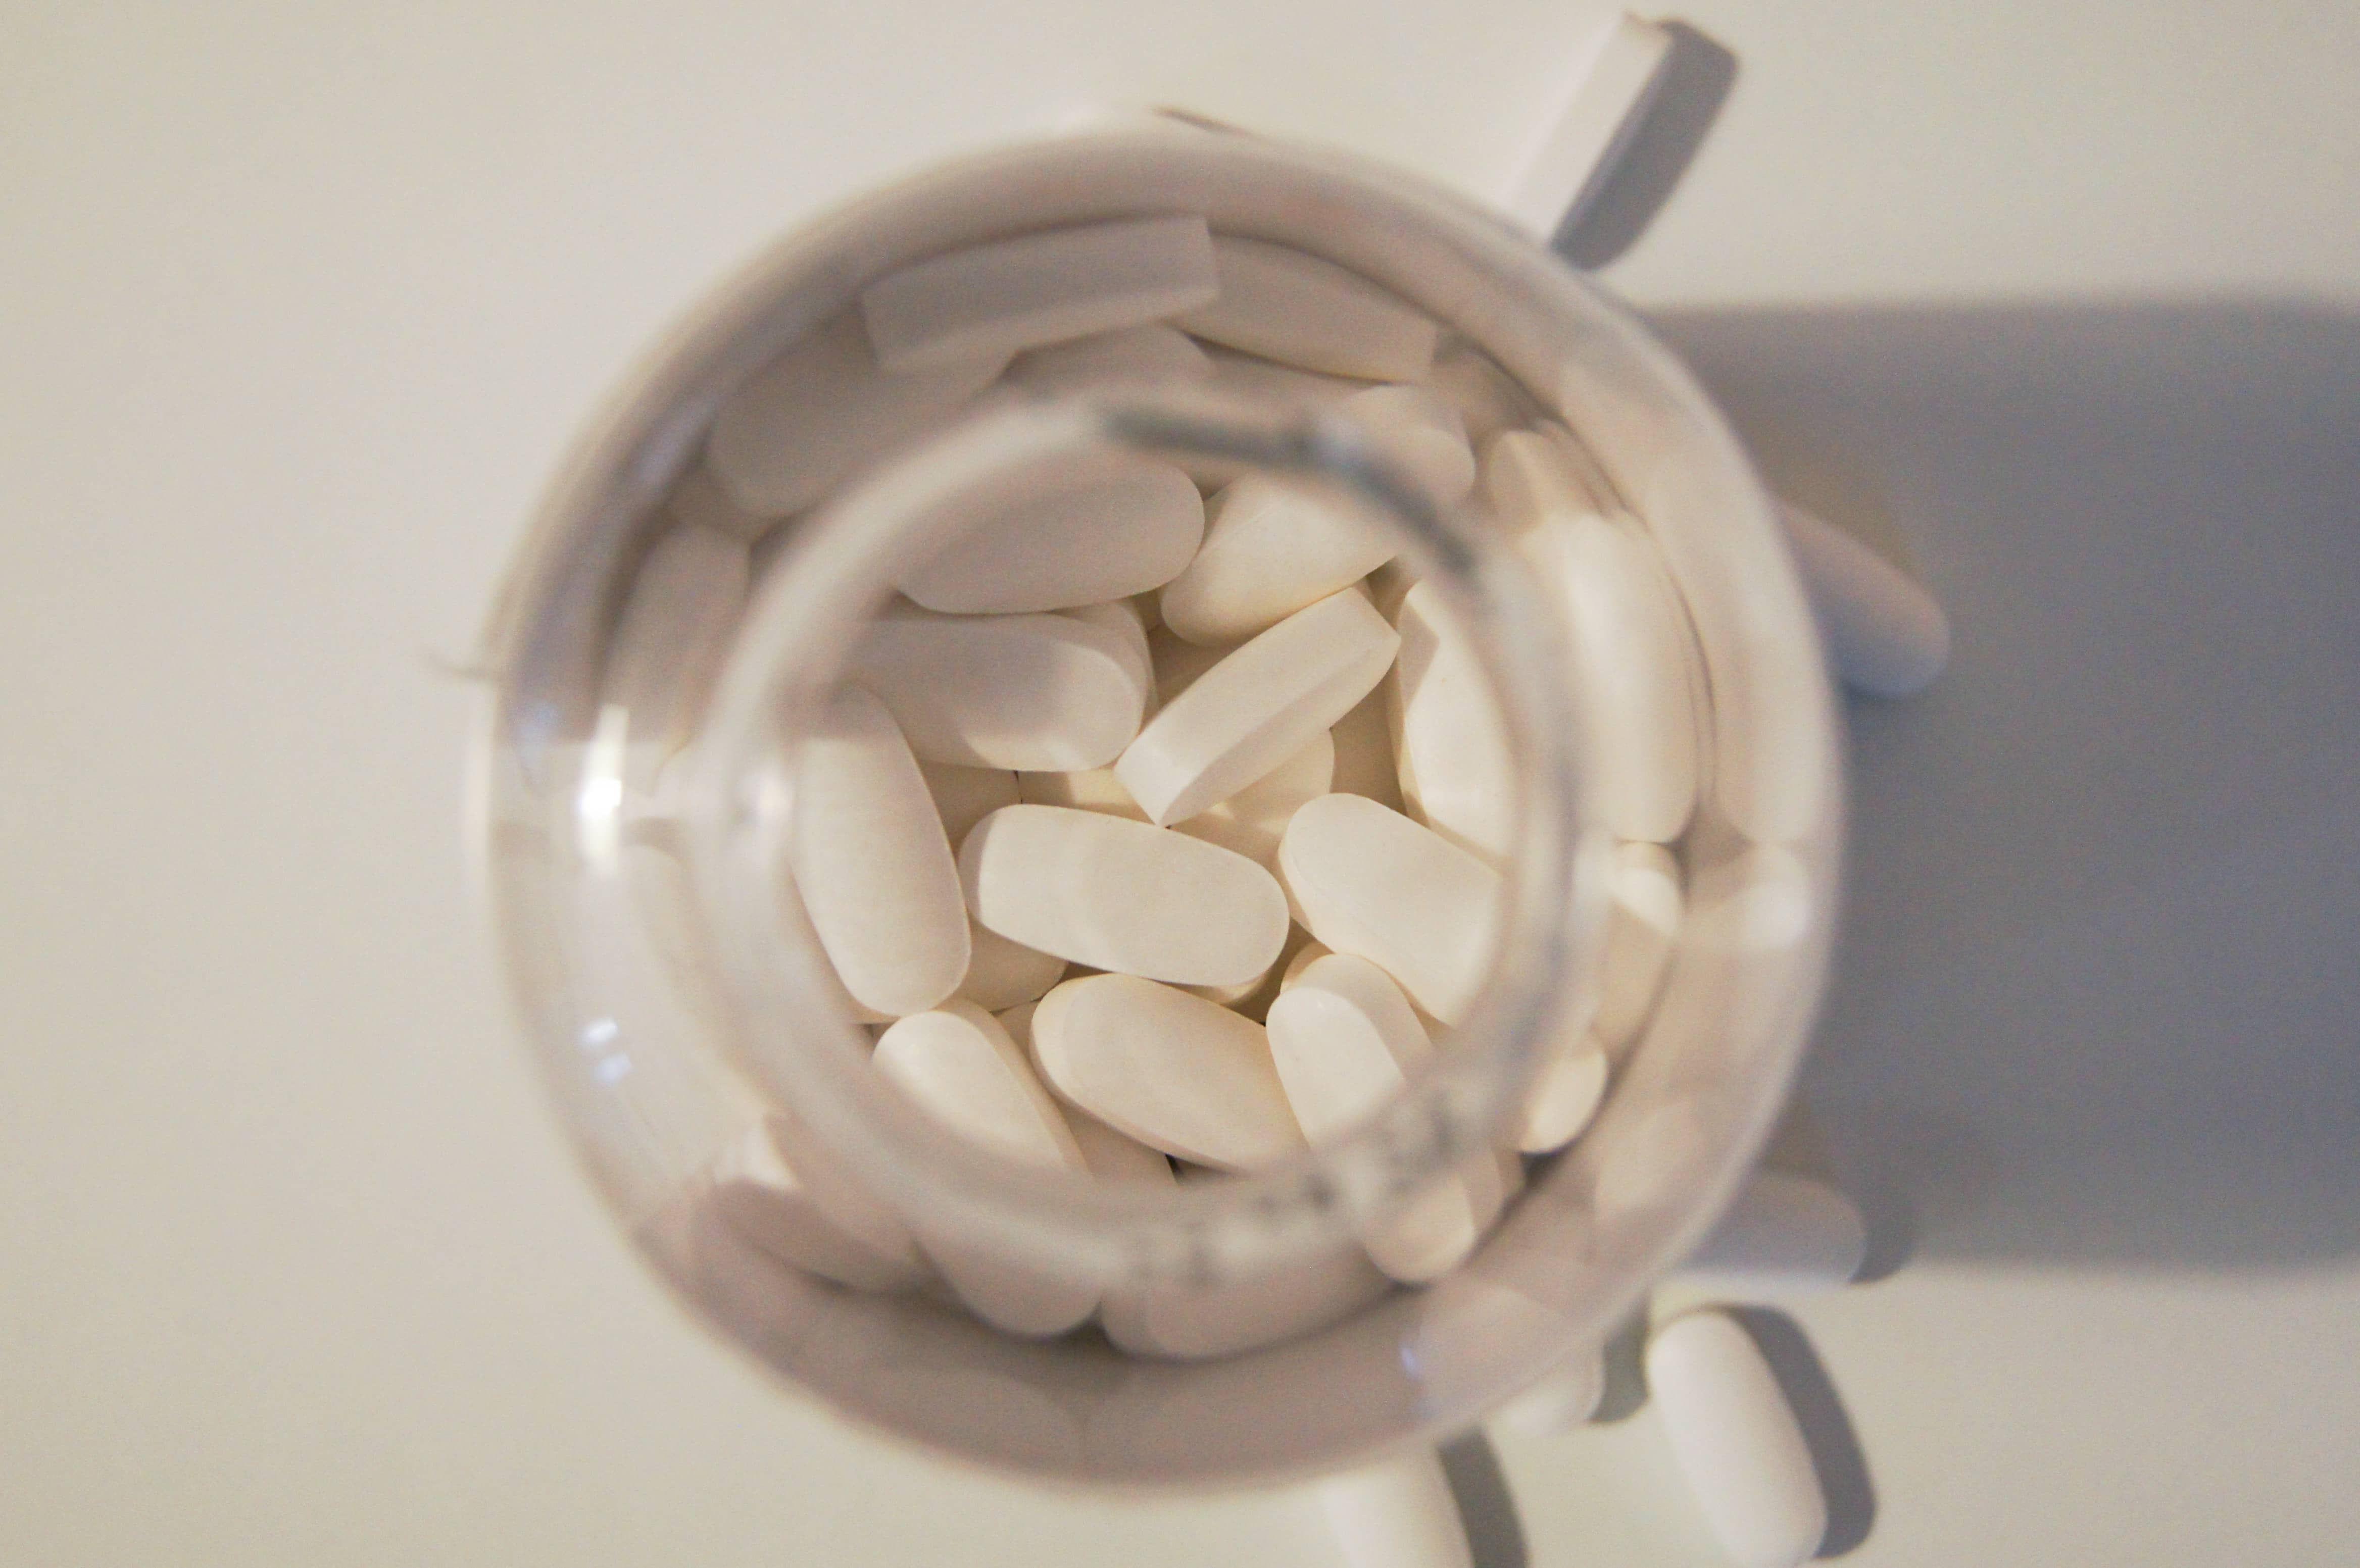 Bottle filled with capsules